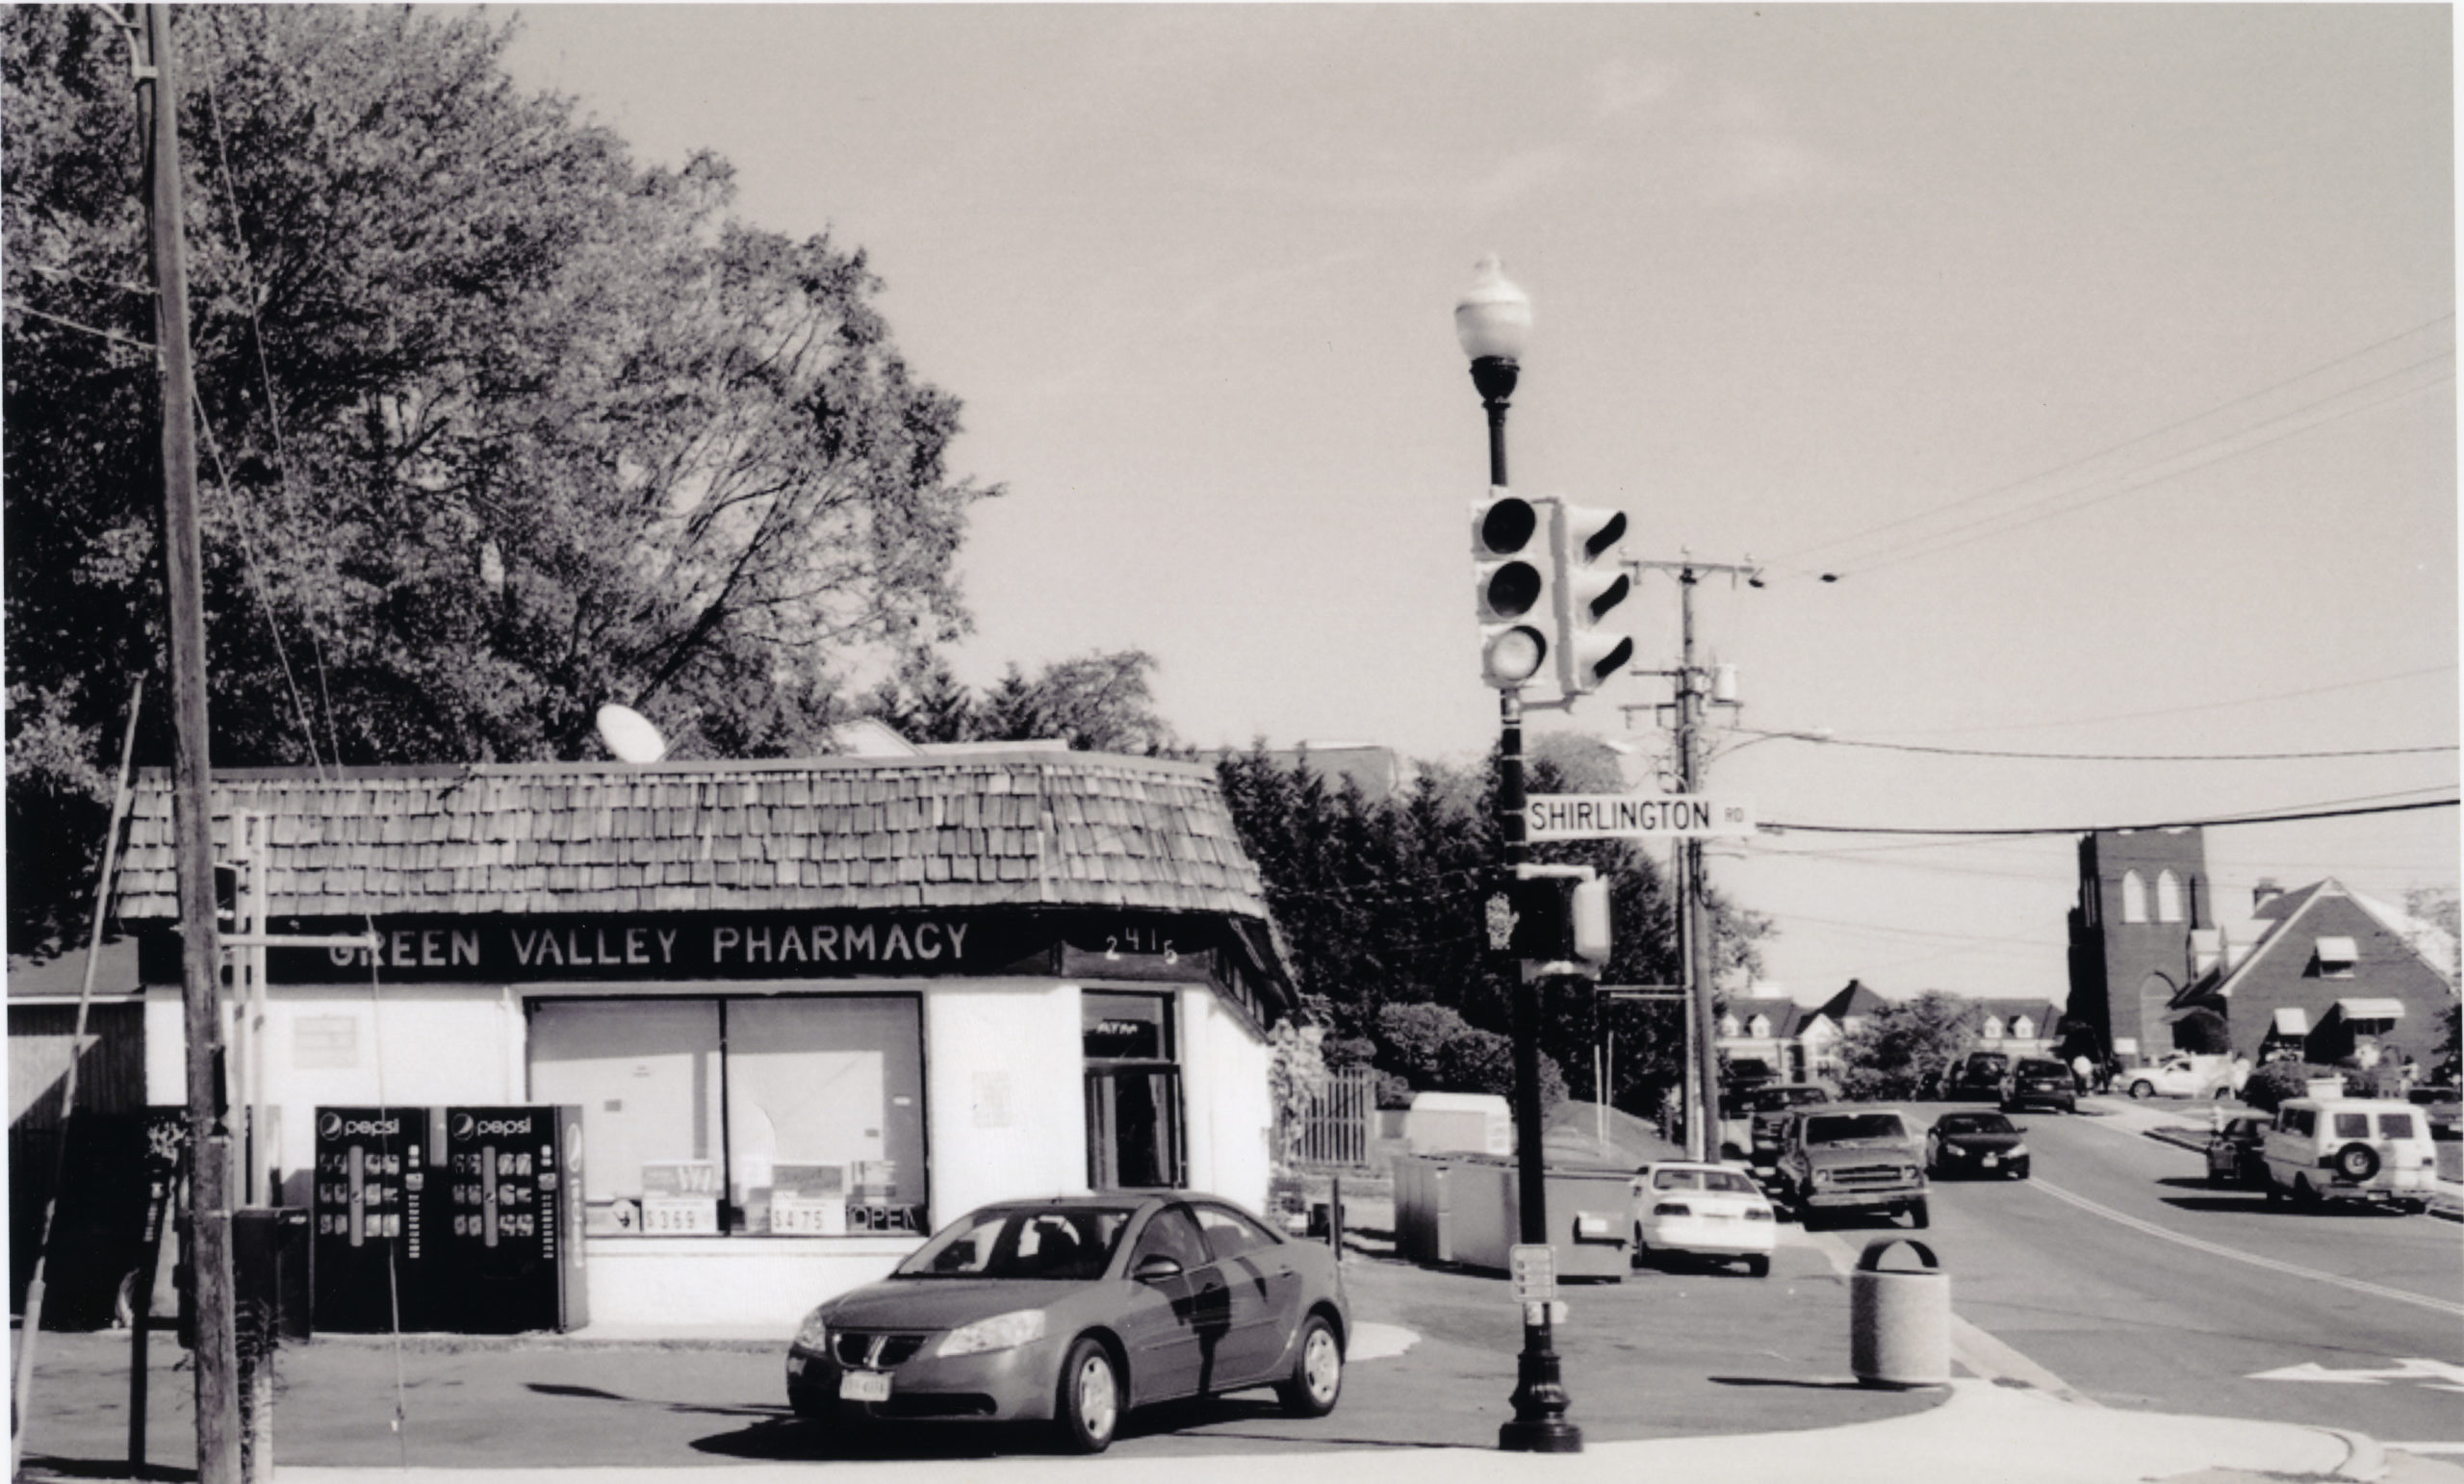 Green Valley Pharmacy, 2010. Taken for Center for Local History Student Photo Contest.